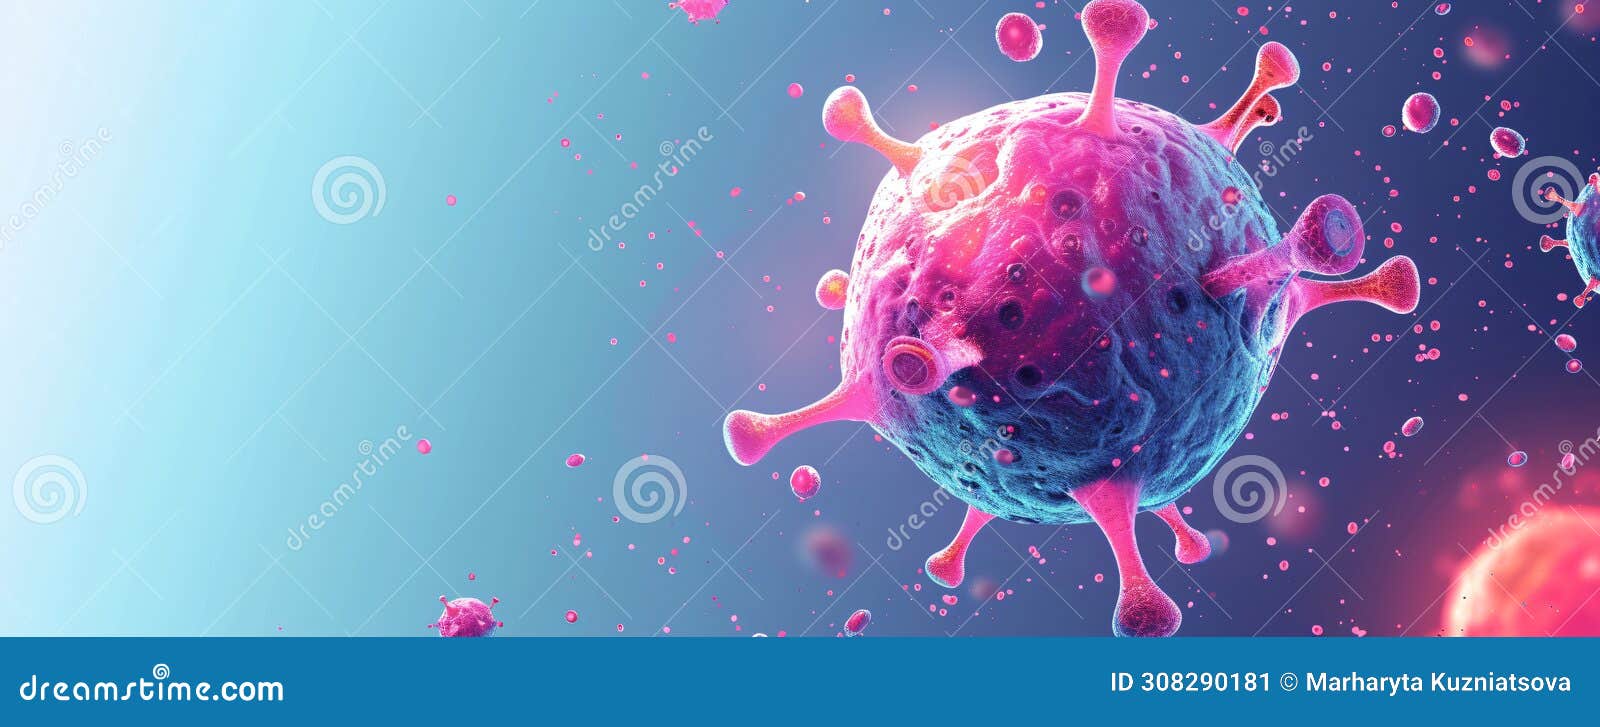 tumor microenvironment background with cancer cells, t-cells, nanoparticles, molecules and blood vessels